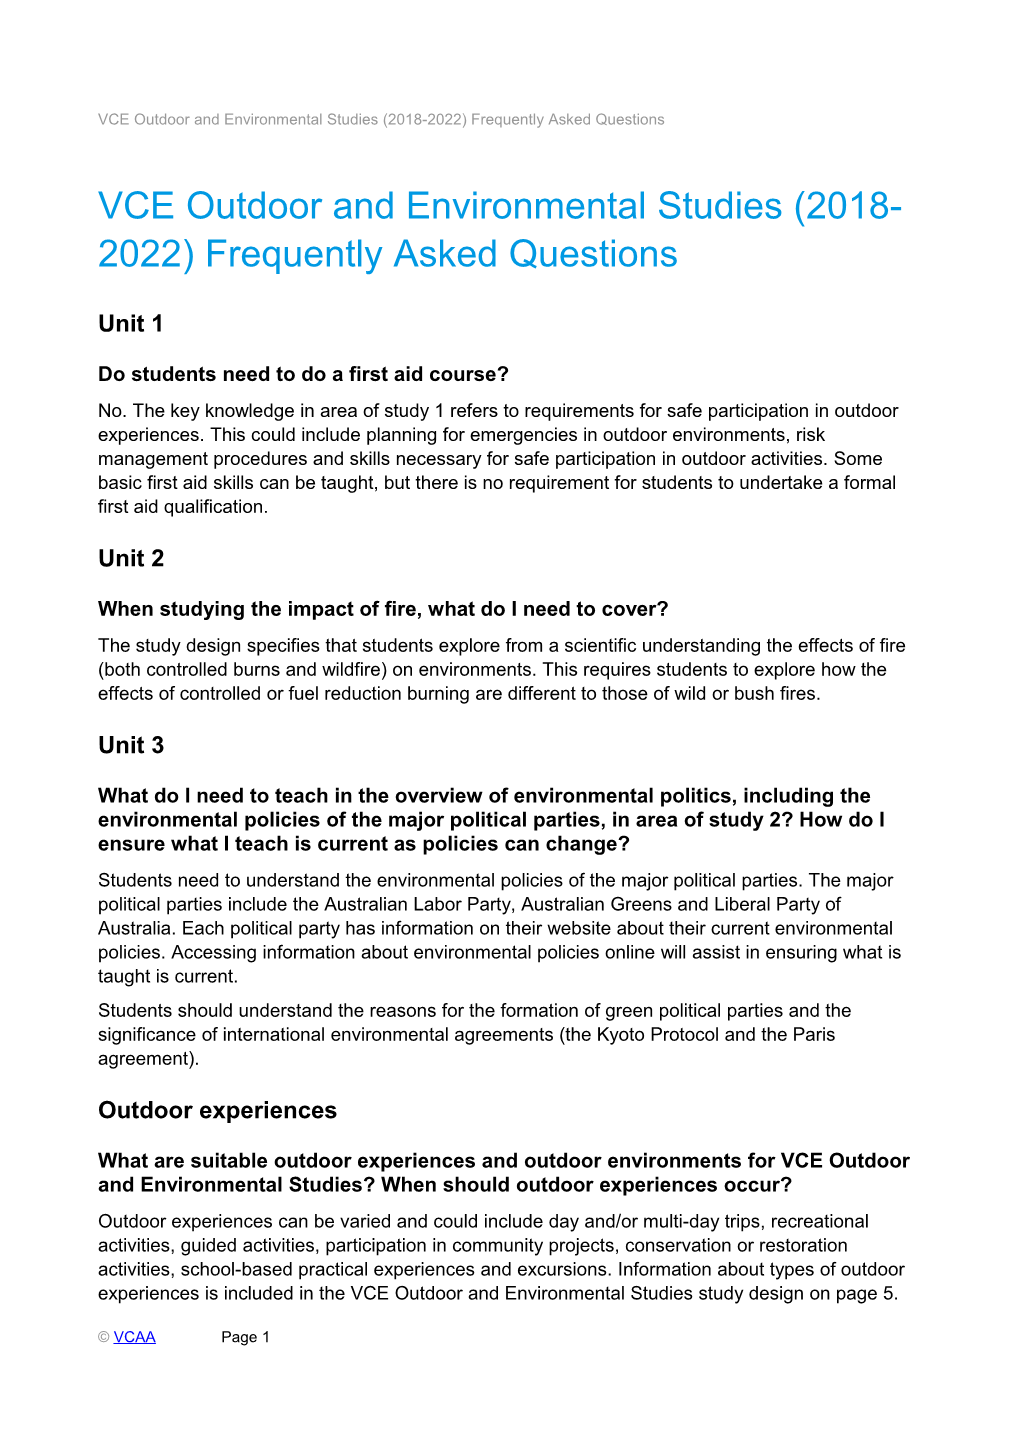 VCE Outdoor and Environmental Studies (2018-2022) Frequently Asked Questions